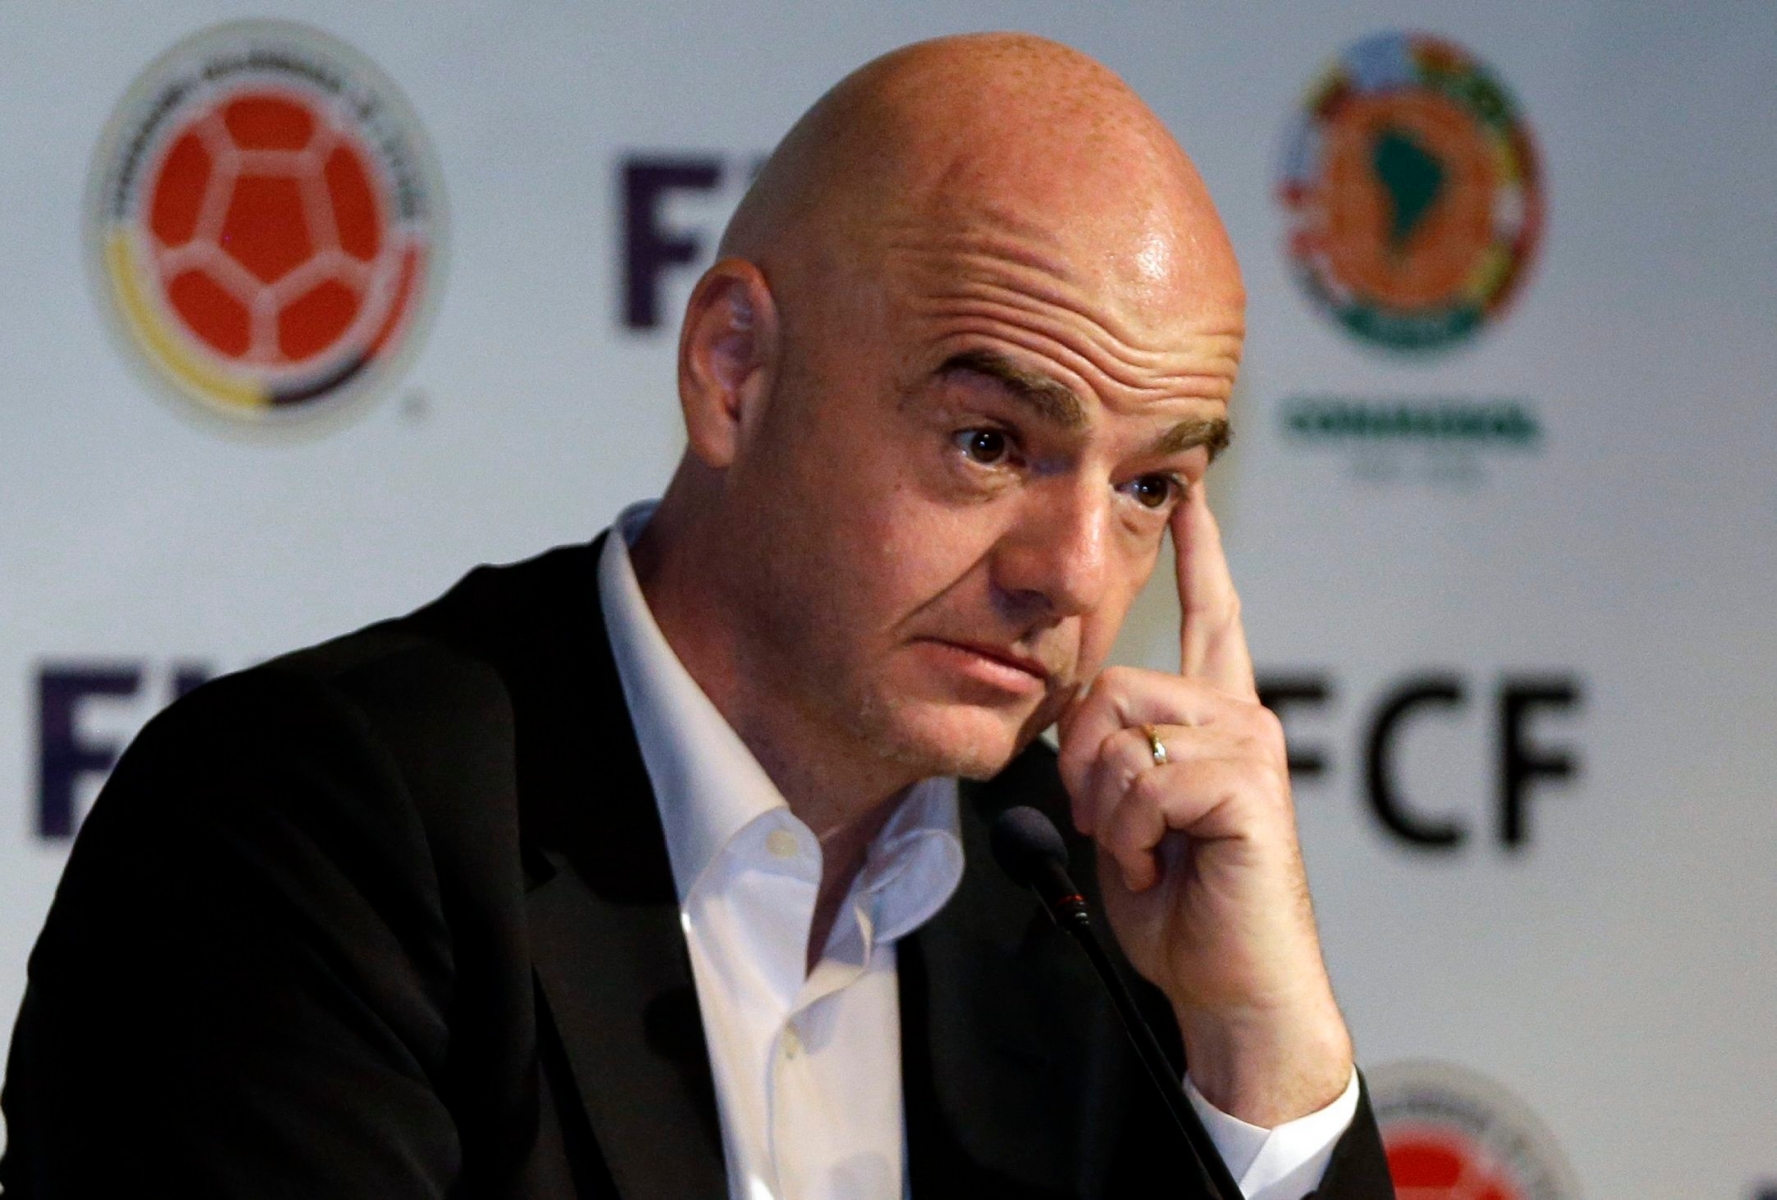 FIFA President Gianni Infantino attends a press conference at the Soccer Federation headquarters in Bogota, Colombia, Thursday, March 31, 2016. Infantino is on a two-day official visit to Colombia. (AP Photo/Fernando Vergara) Colombia FIFA Infantino